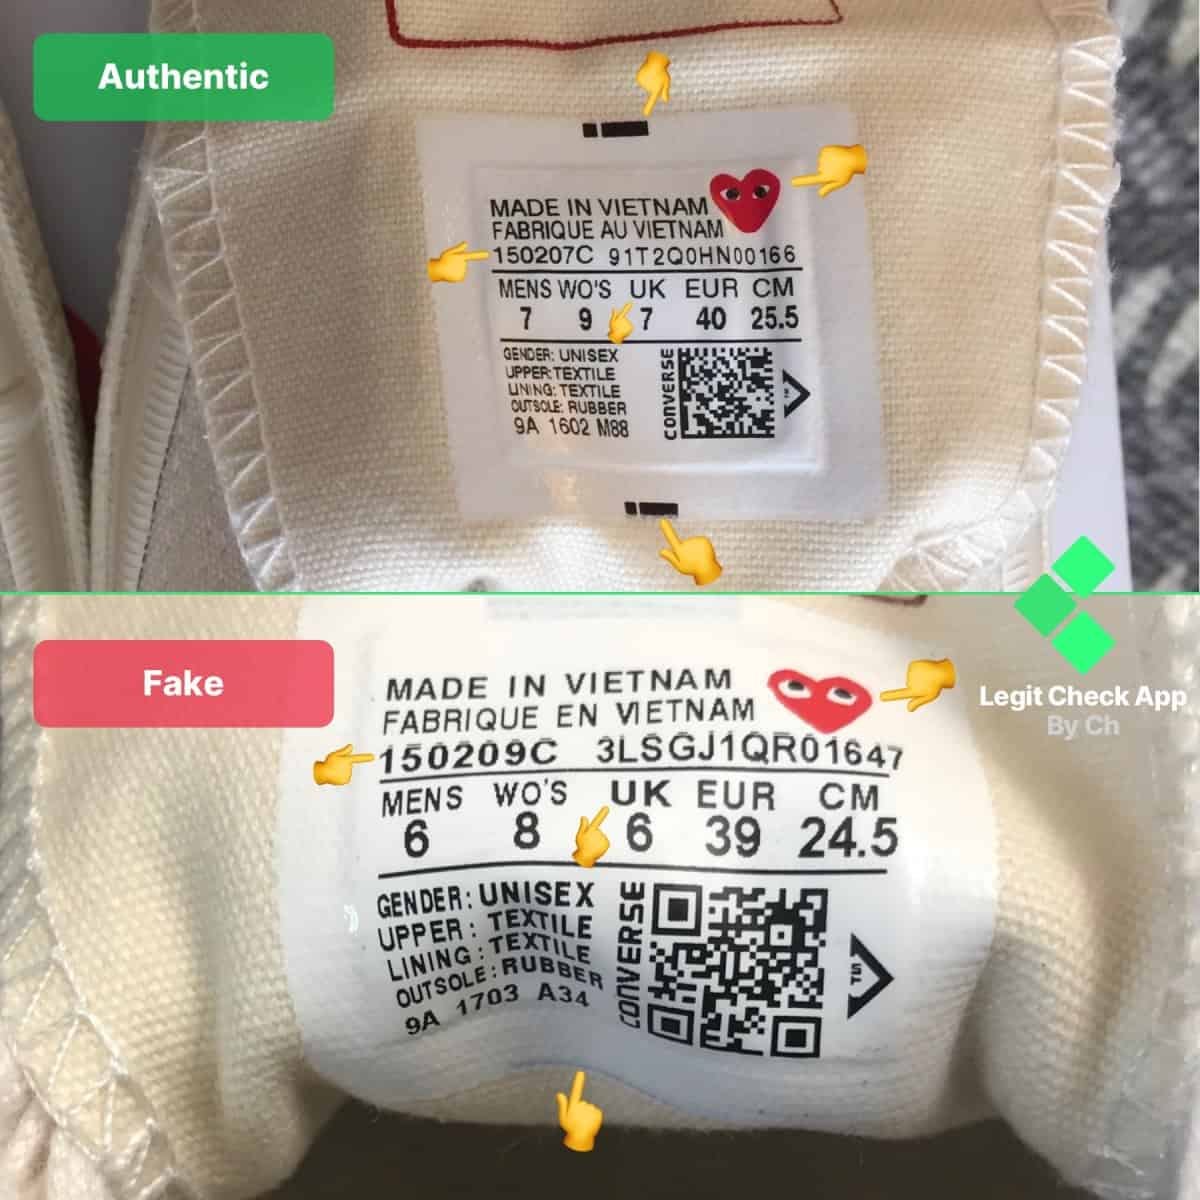 Andre steder sig selv semester How To Spot Fake Comme Des Garcons CDG Converse Sneakers | by Legit Check  By Ch | Medium